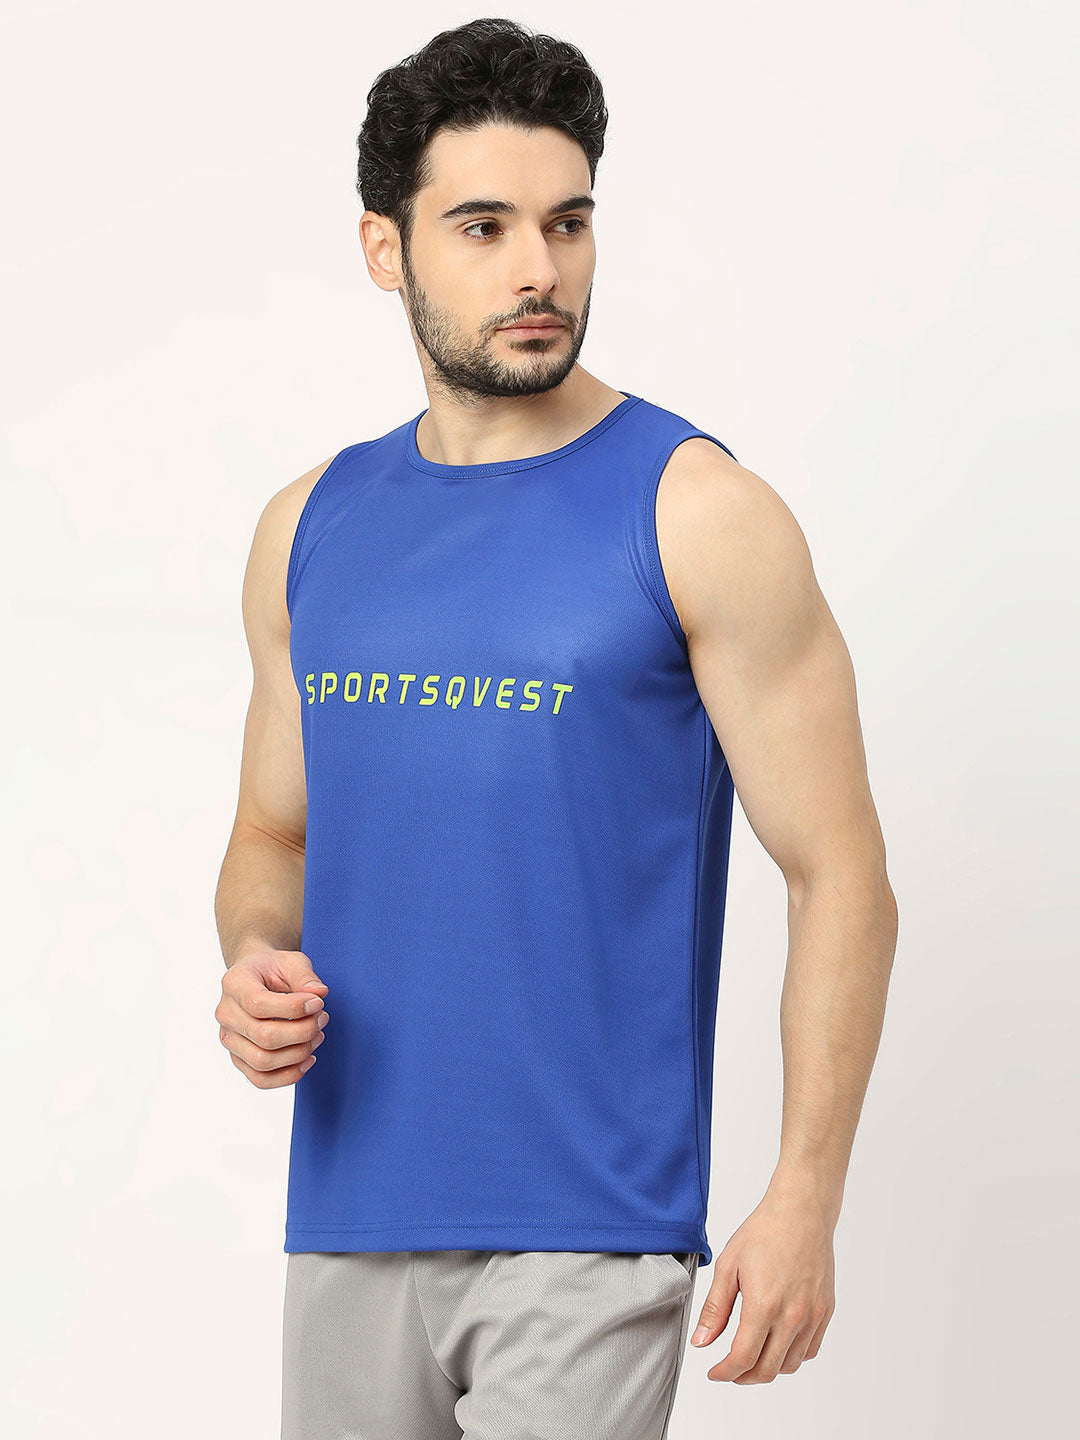 Shop Men's Royal Blue Sports Vest - Stay Cool and Comfortable